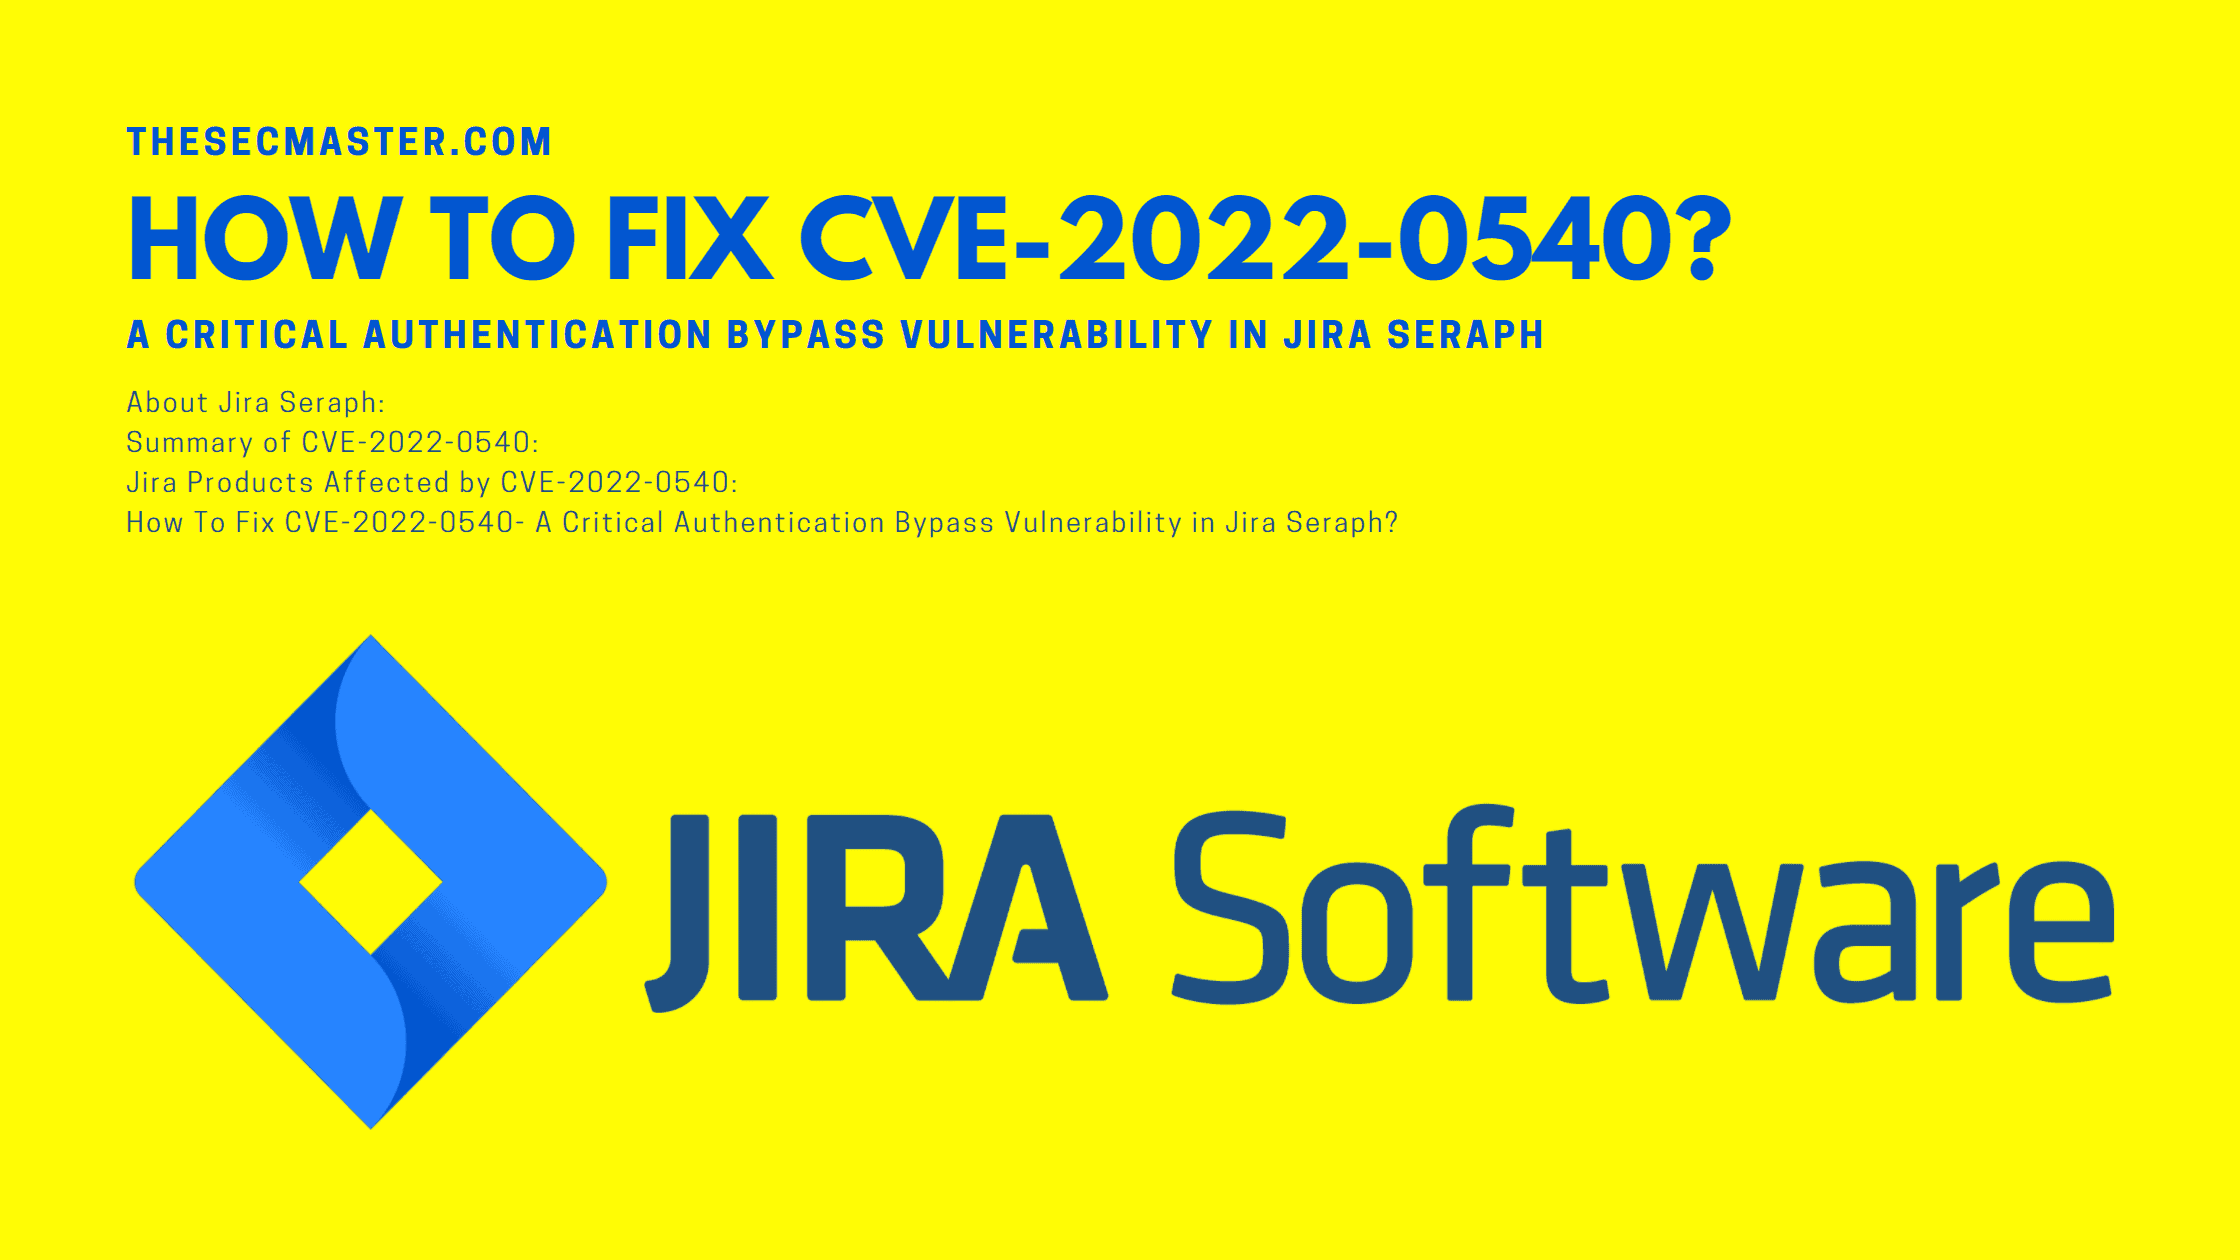 How To Fix Cve 2022 0540 A Critical Authentication Bypass Vulnerability In Jira Seraph